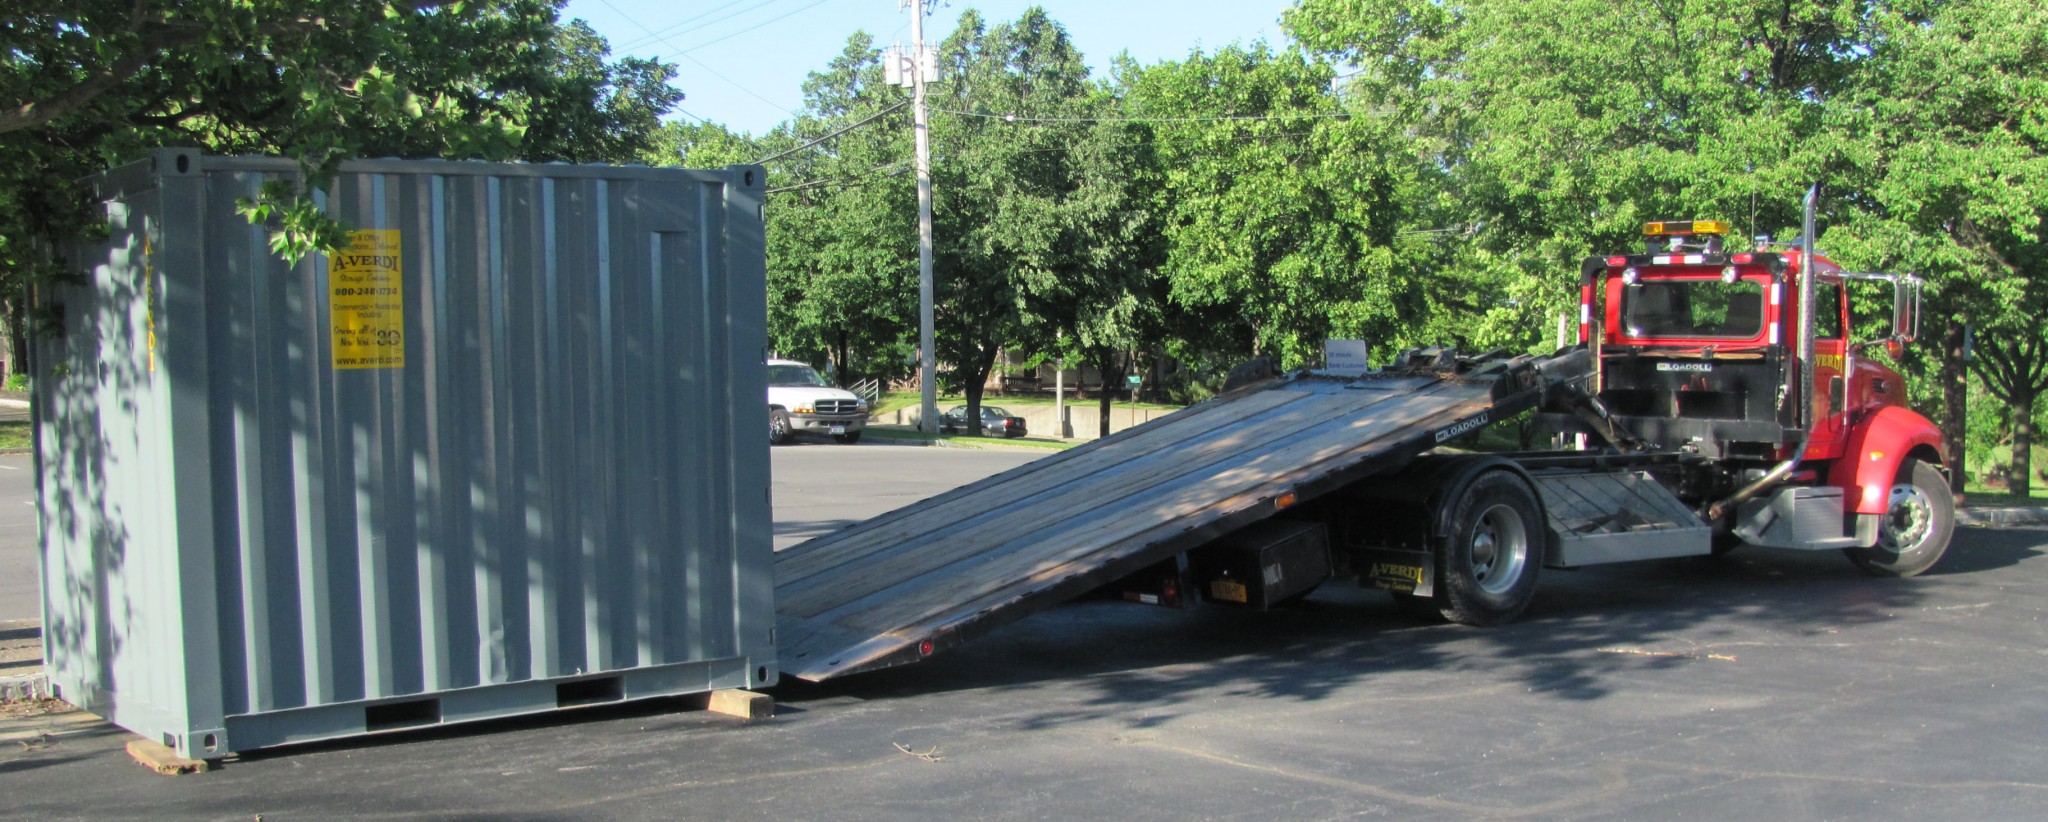 Moving Your Ground Level Office or Storage Container - A-Verdi